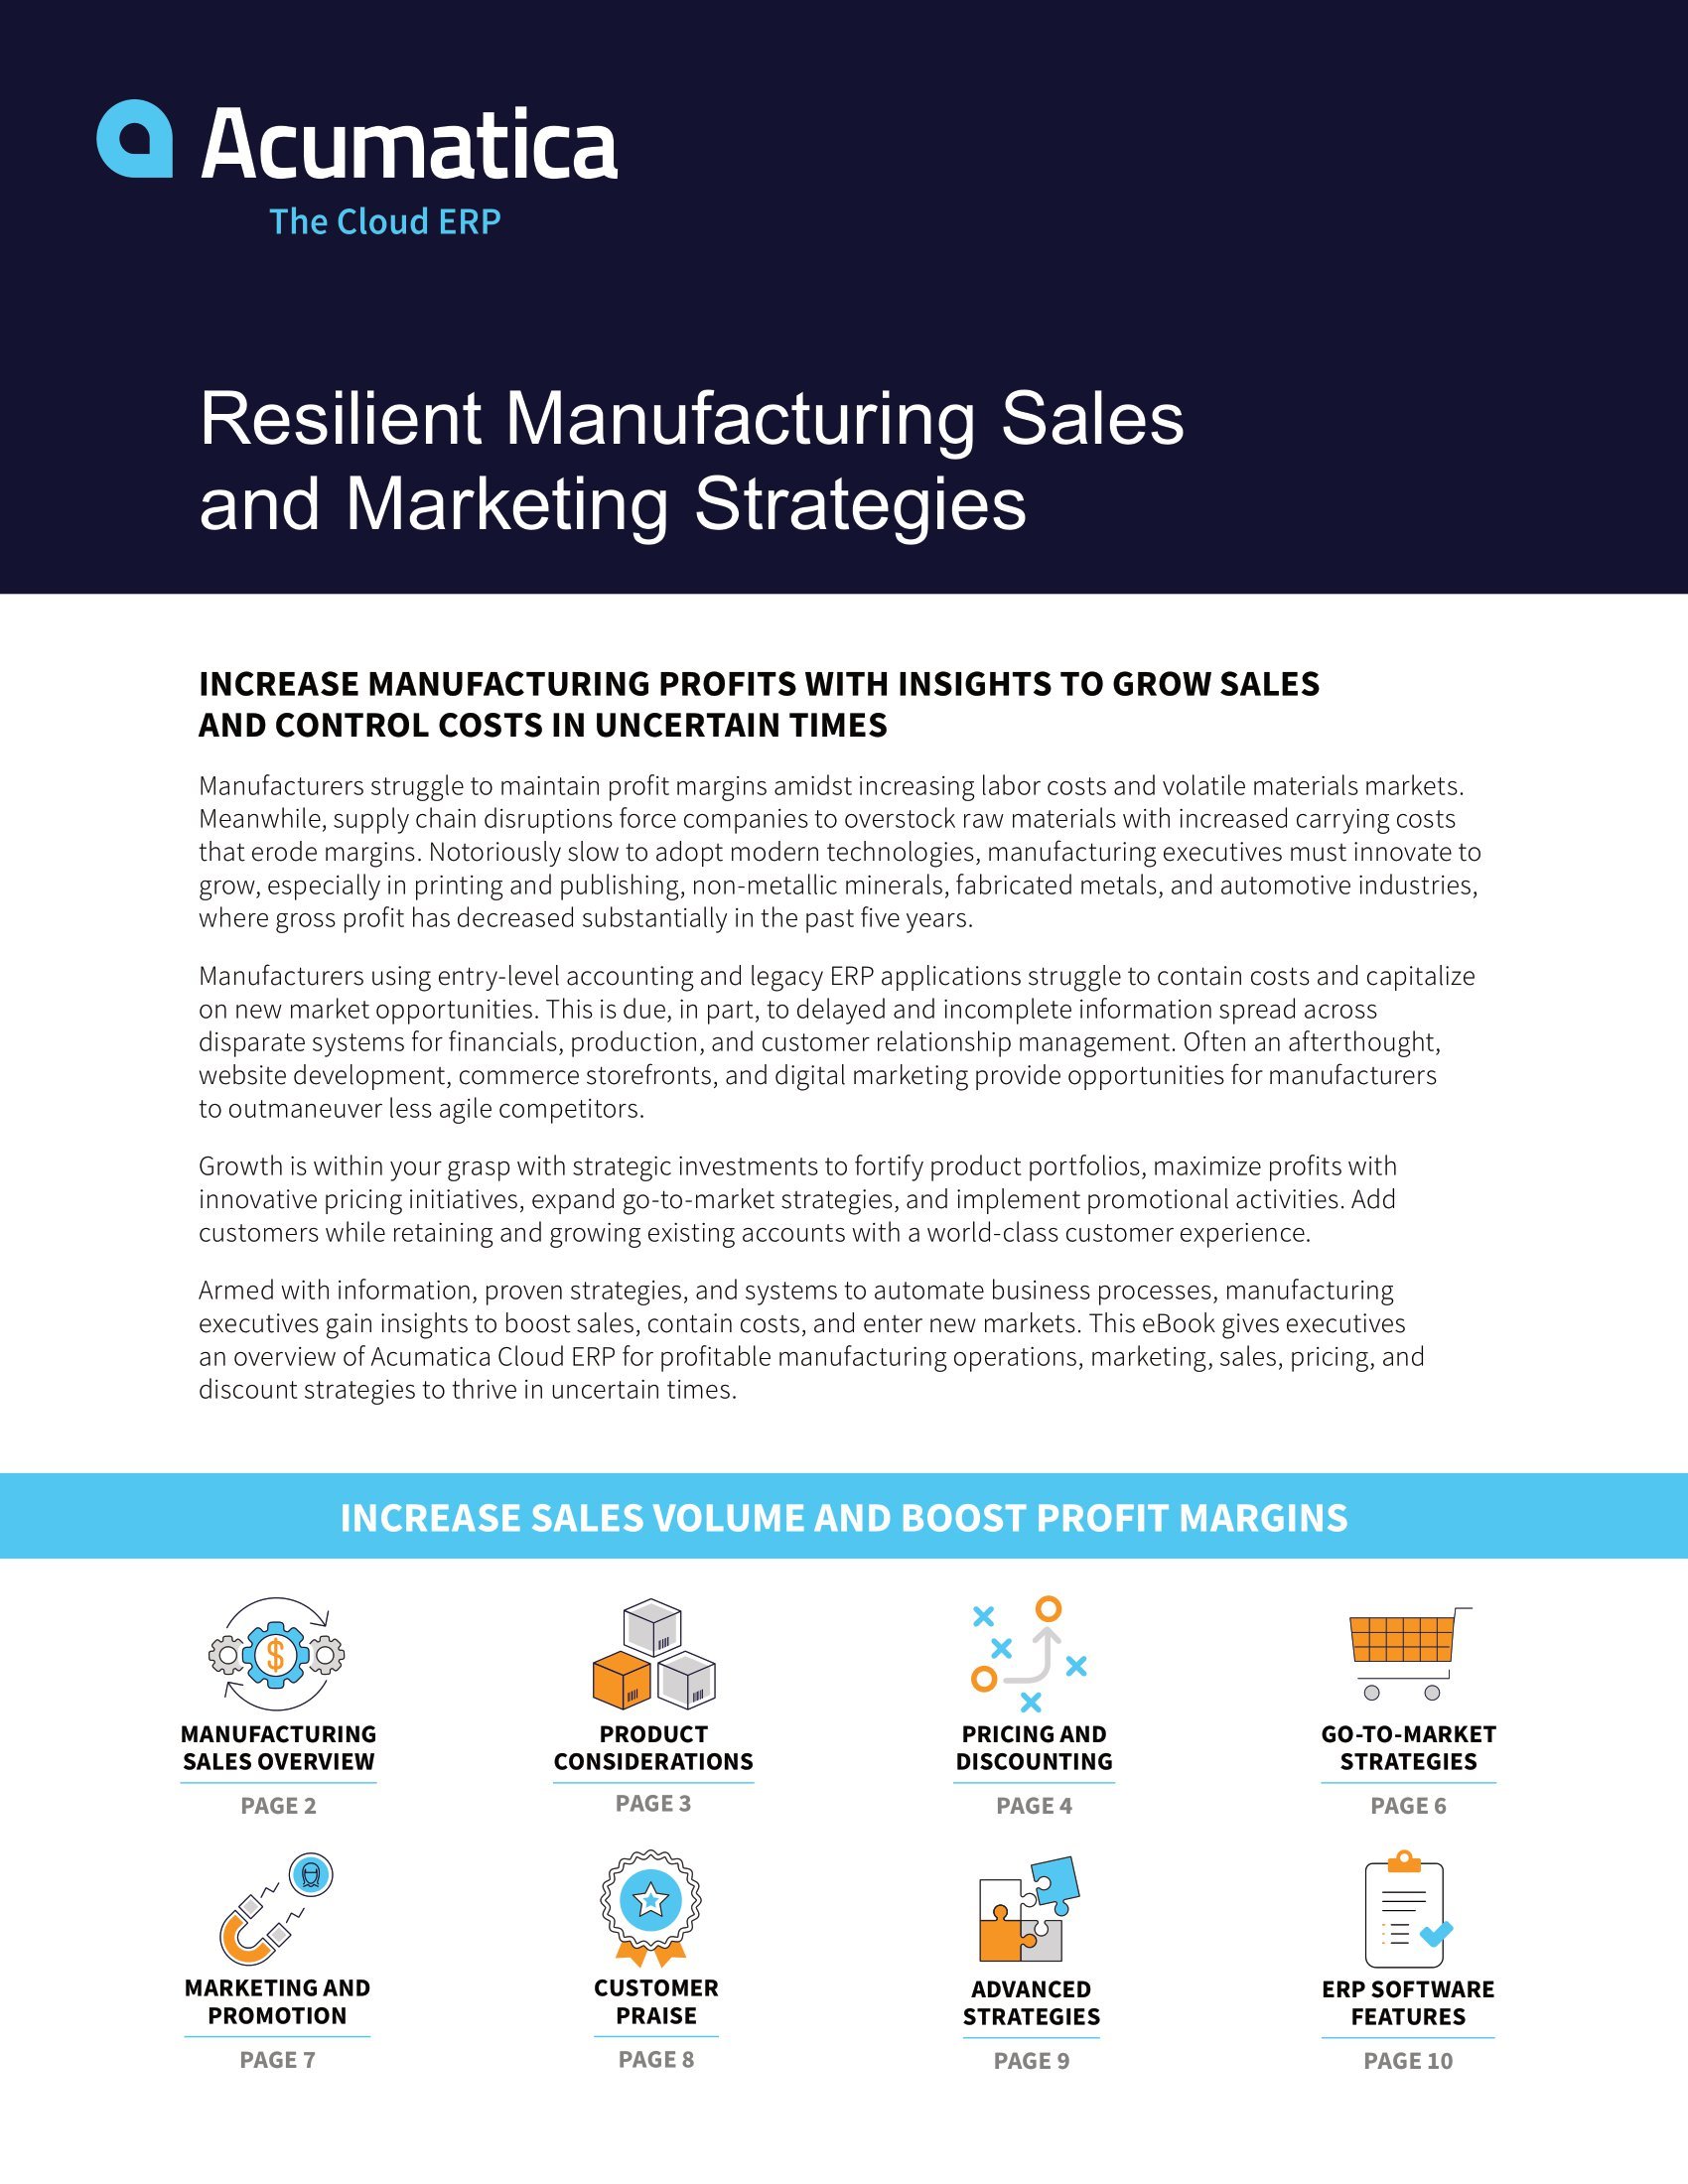 Gain Manufacturing Sales Resiliency with Acumatica’s Insight-Driving ERP Solution